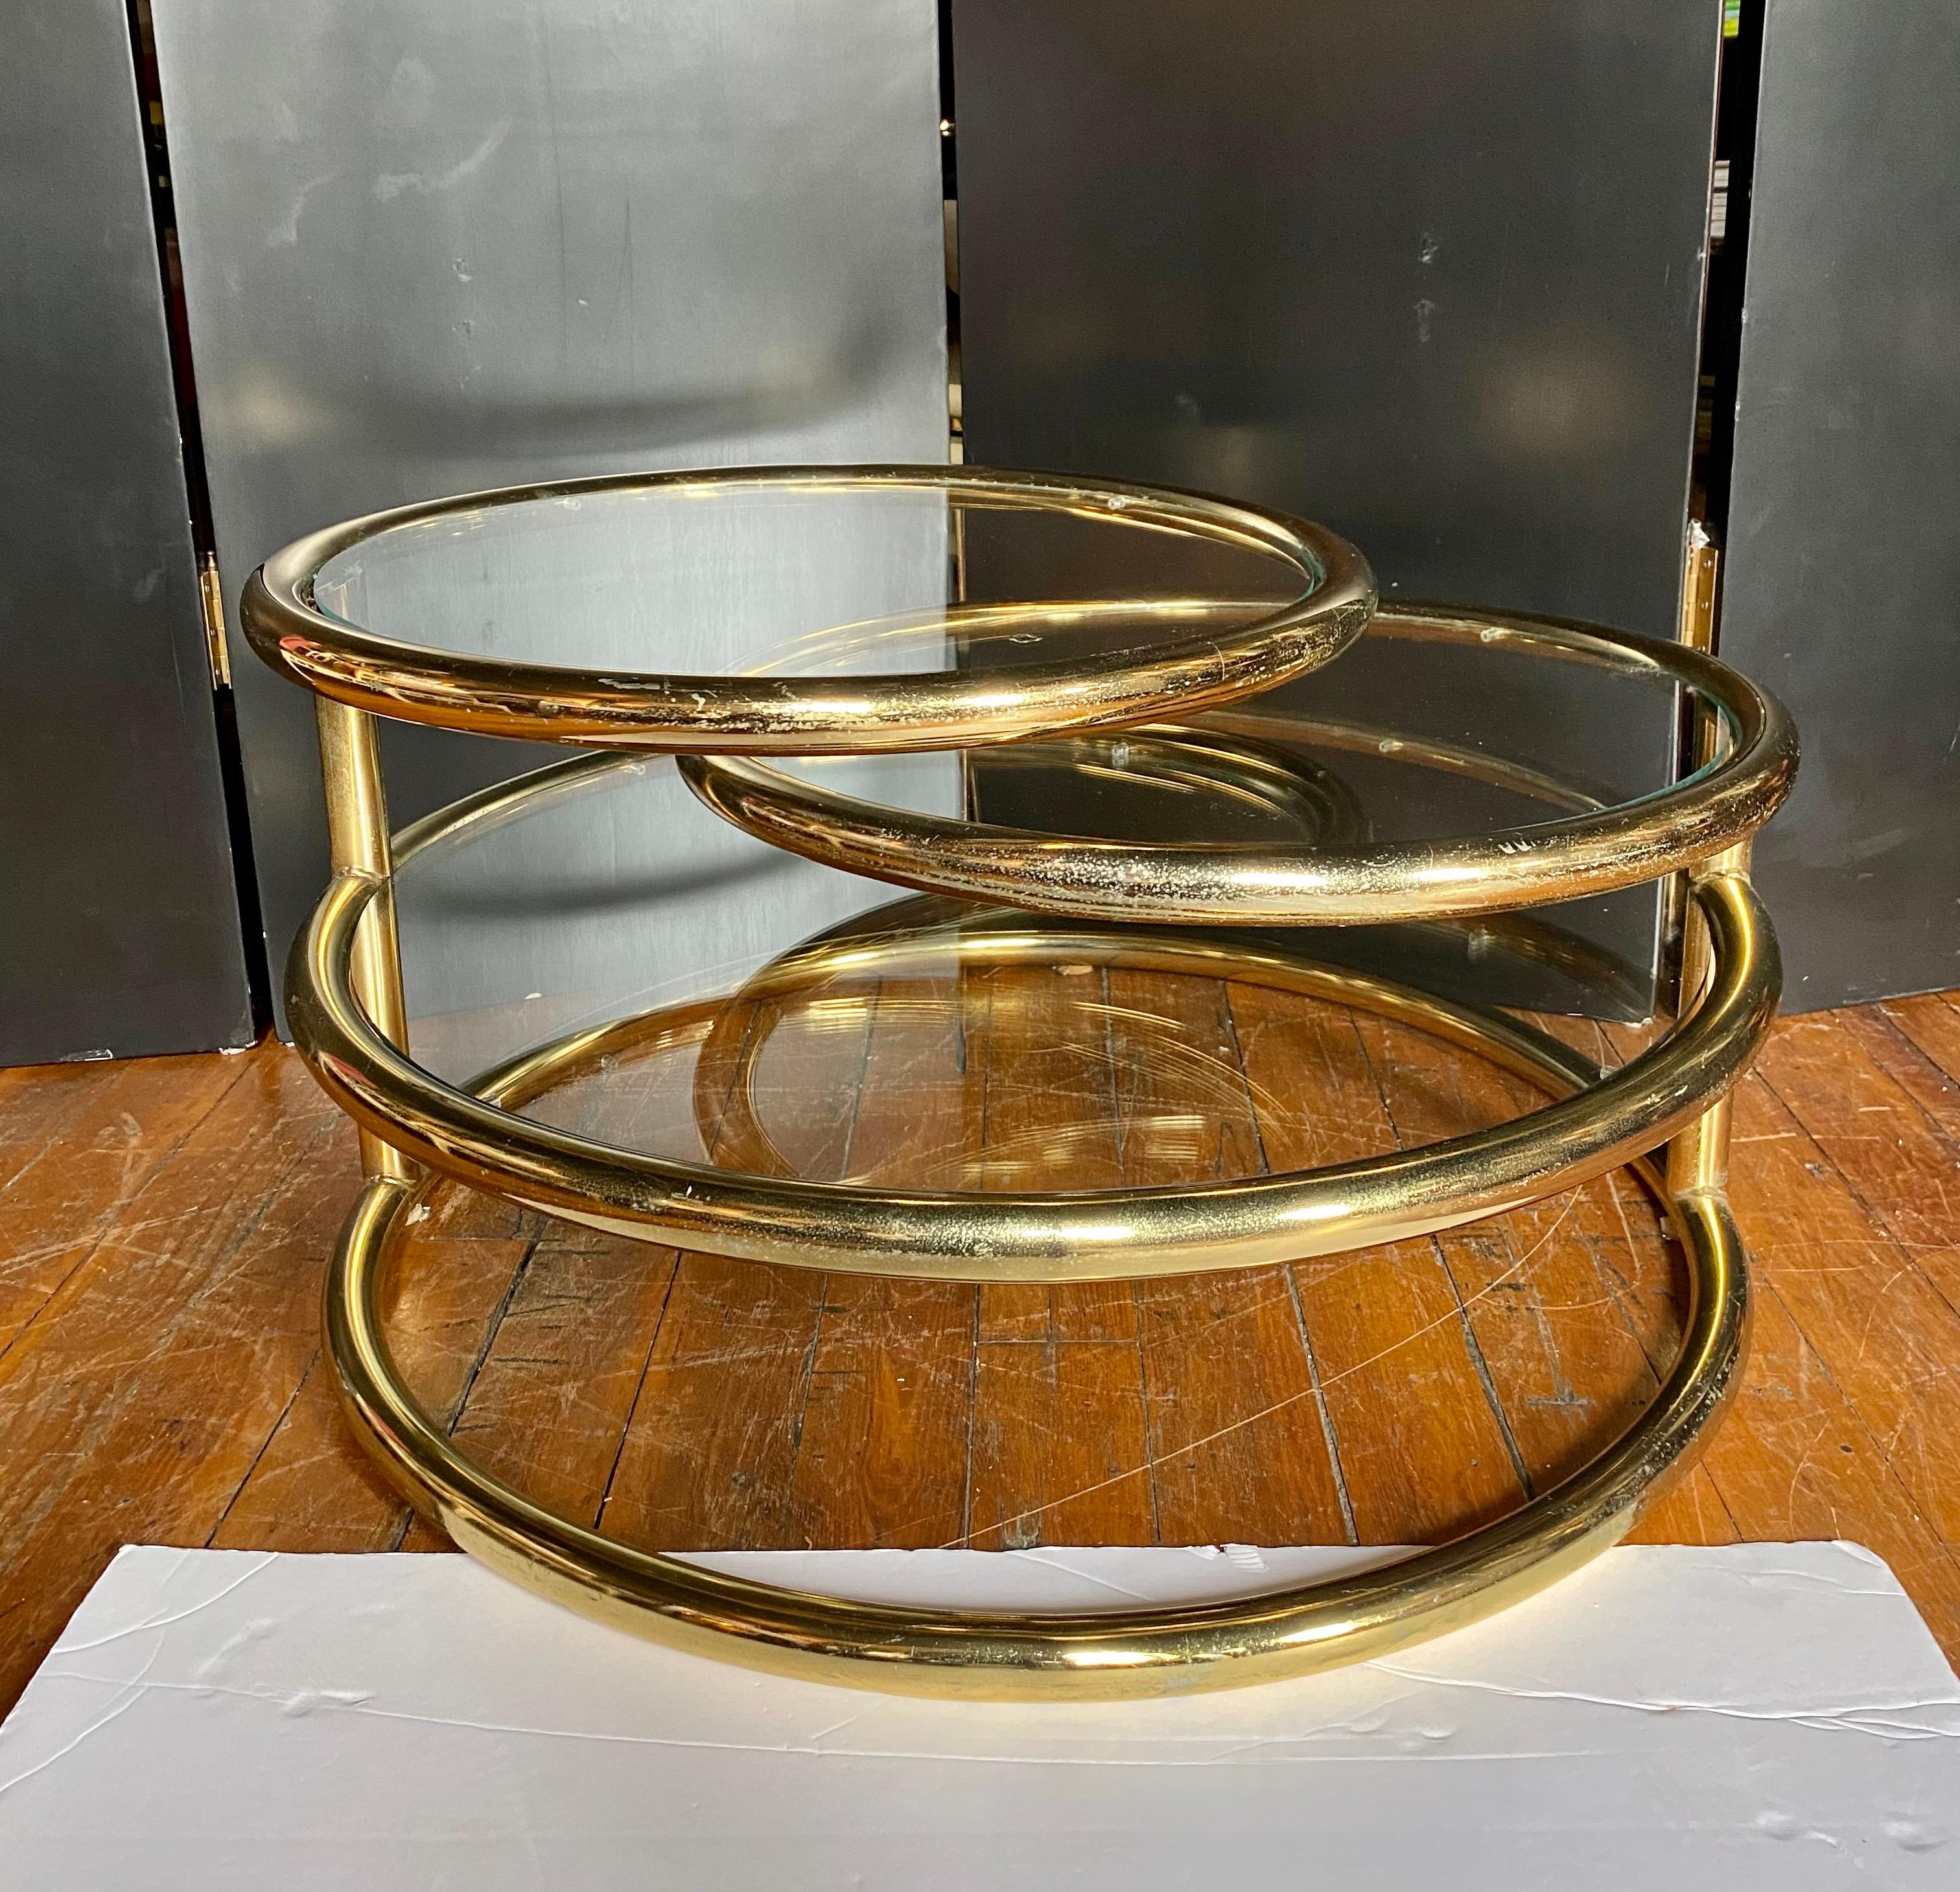 Mid Century Modern three tier brass gold plated metal and glass swivel coffee table in the style of Milo Baughman. The top two tiers of this versatile cocktail table pivot to expand to a width of 71.5 inches when fully extended. This round tubular